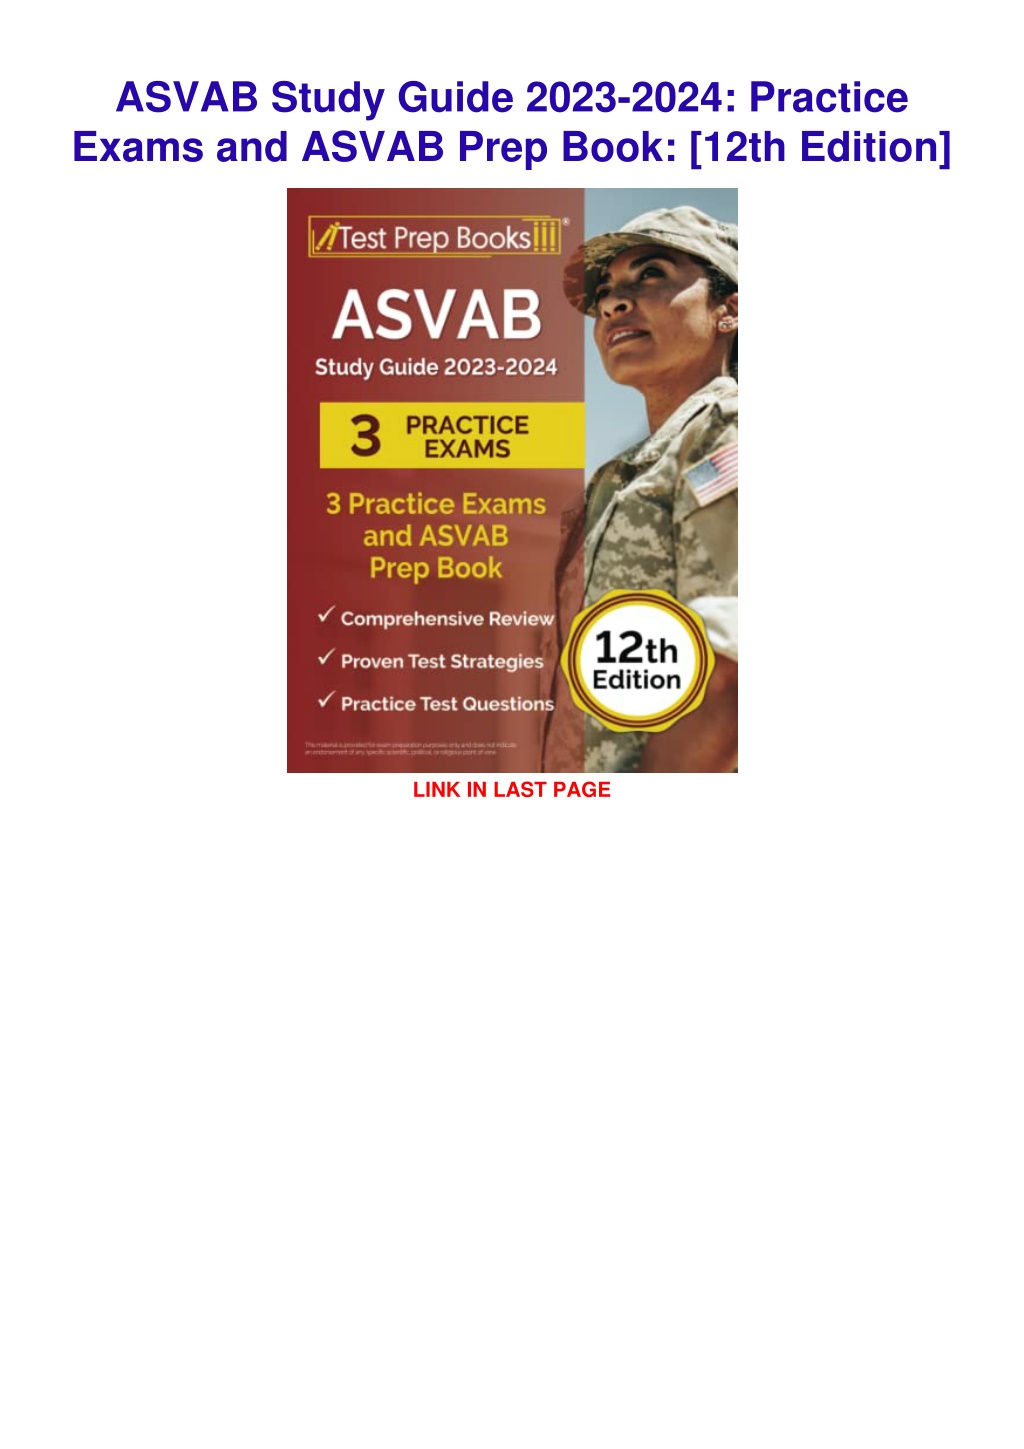 PPT [PDF] DOWNLOAD ASVAB Study Guide 20232024 Practice Exams and